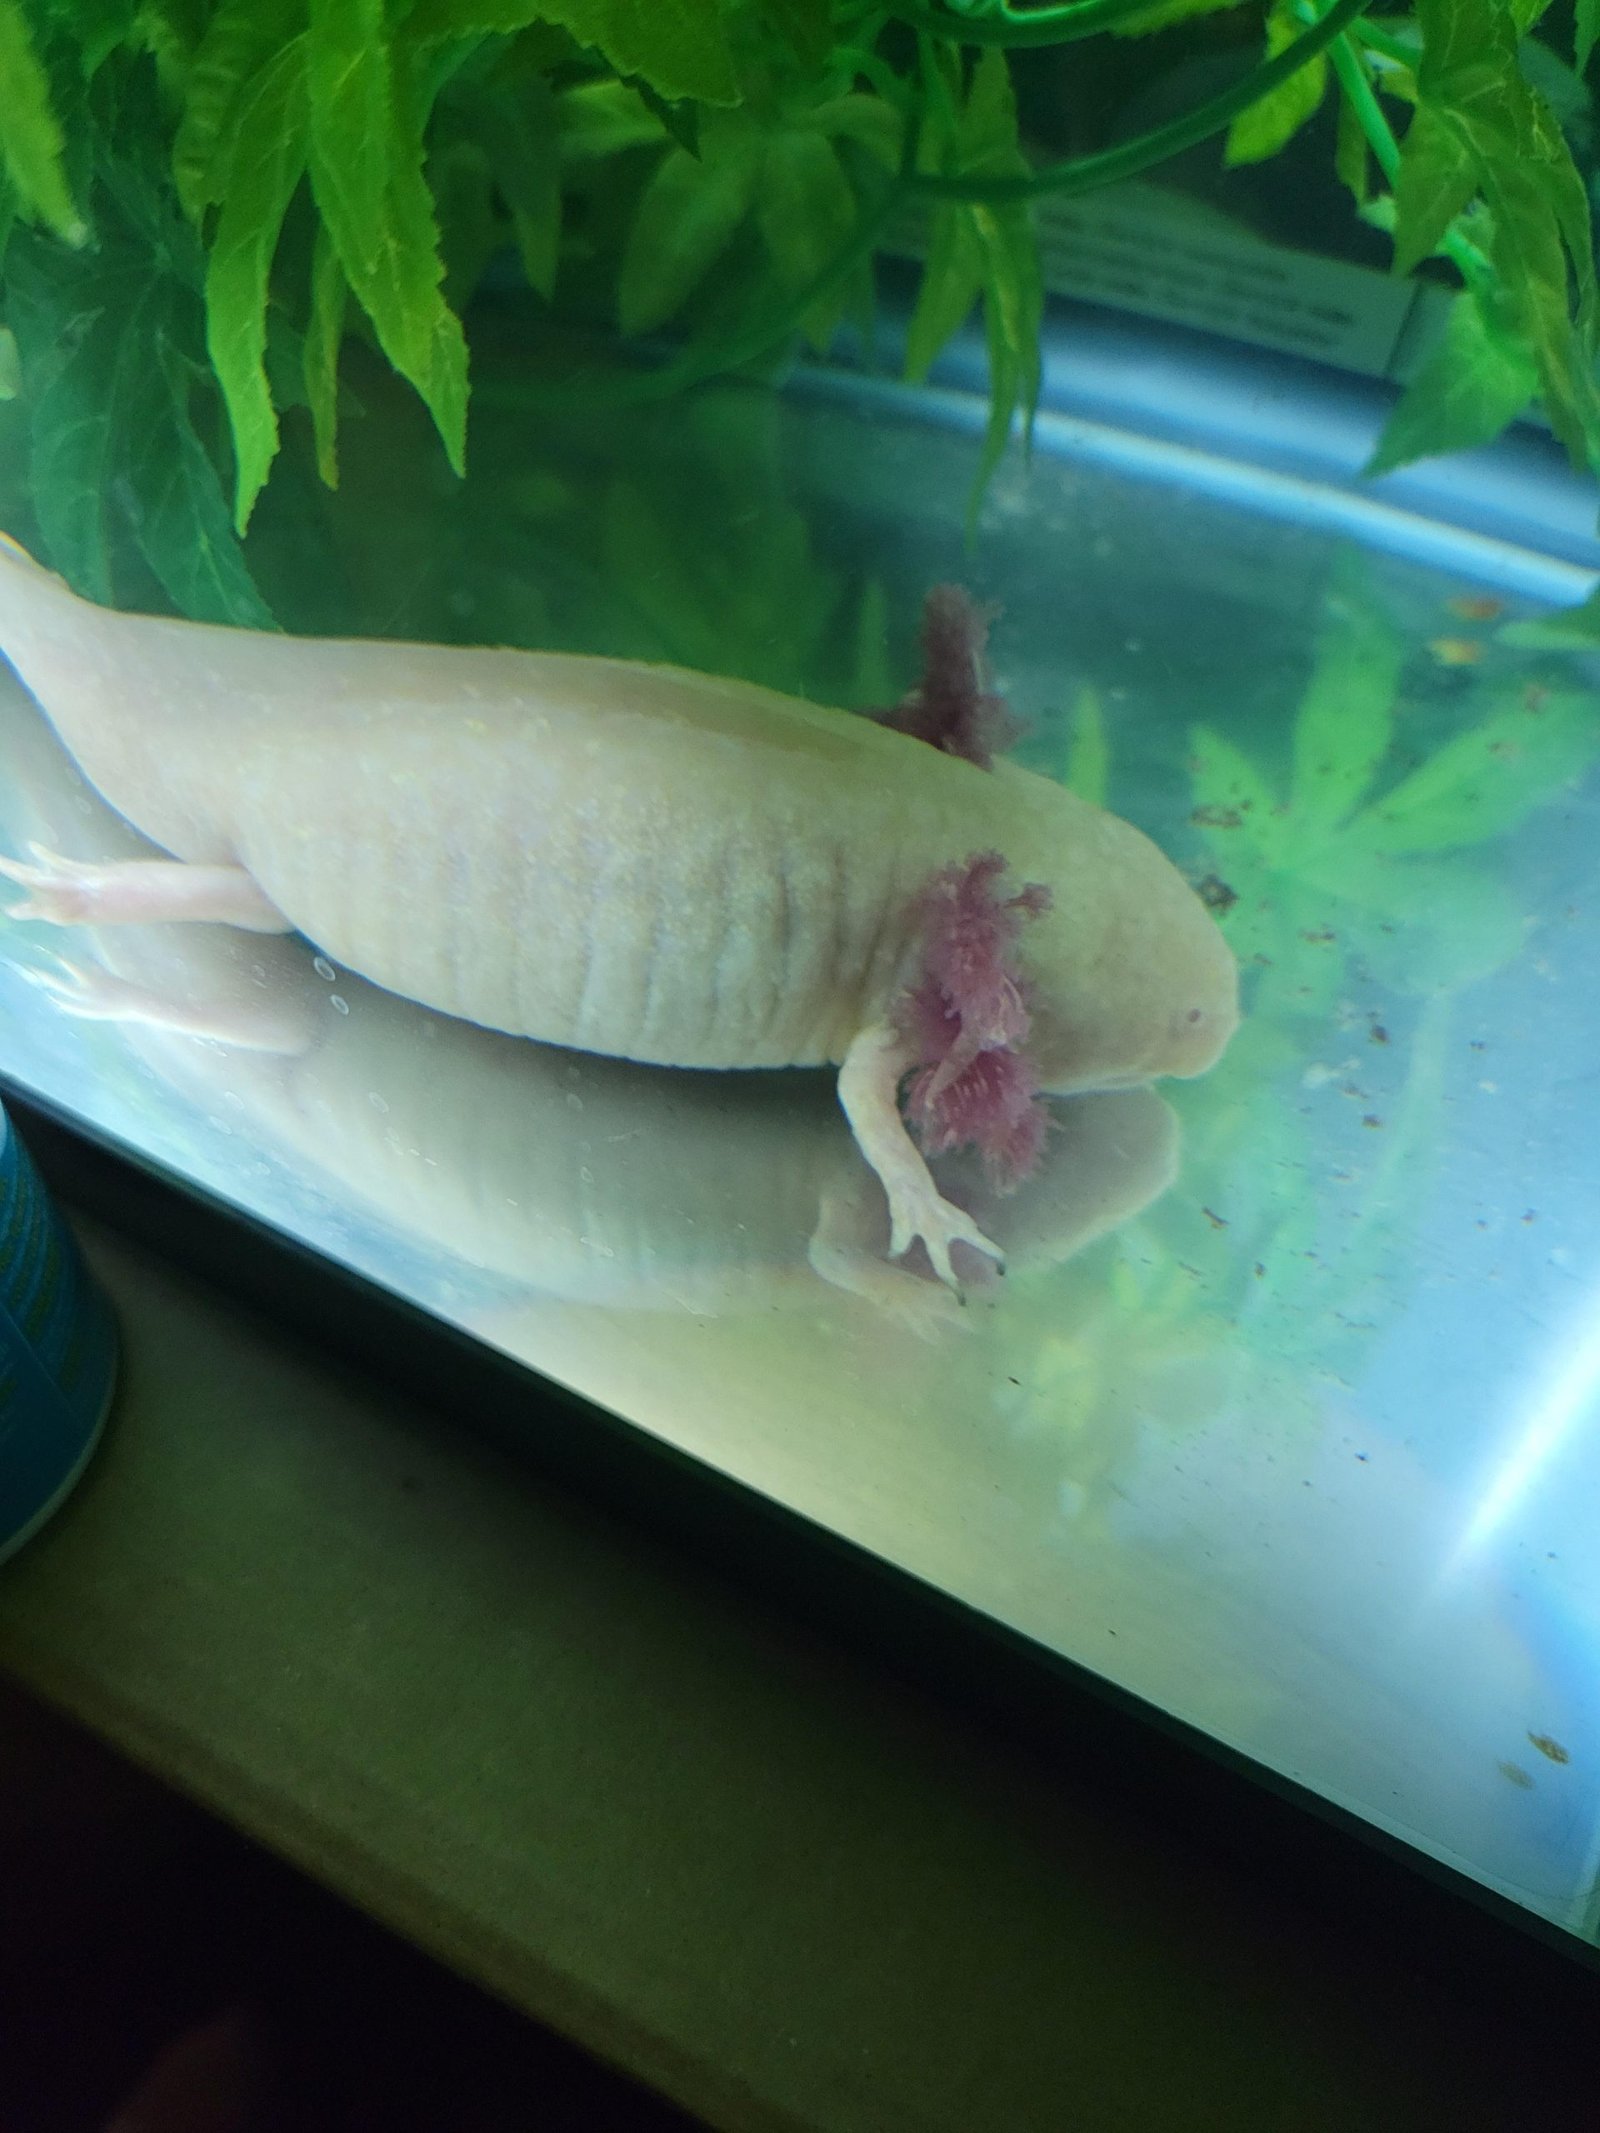 How Do I Know If My Axolotl is Dying